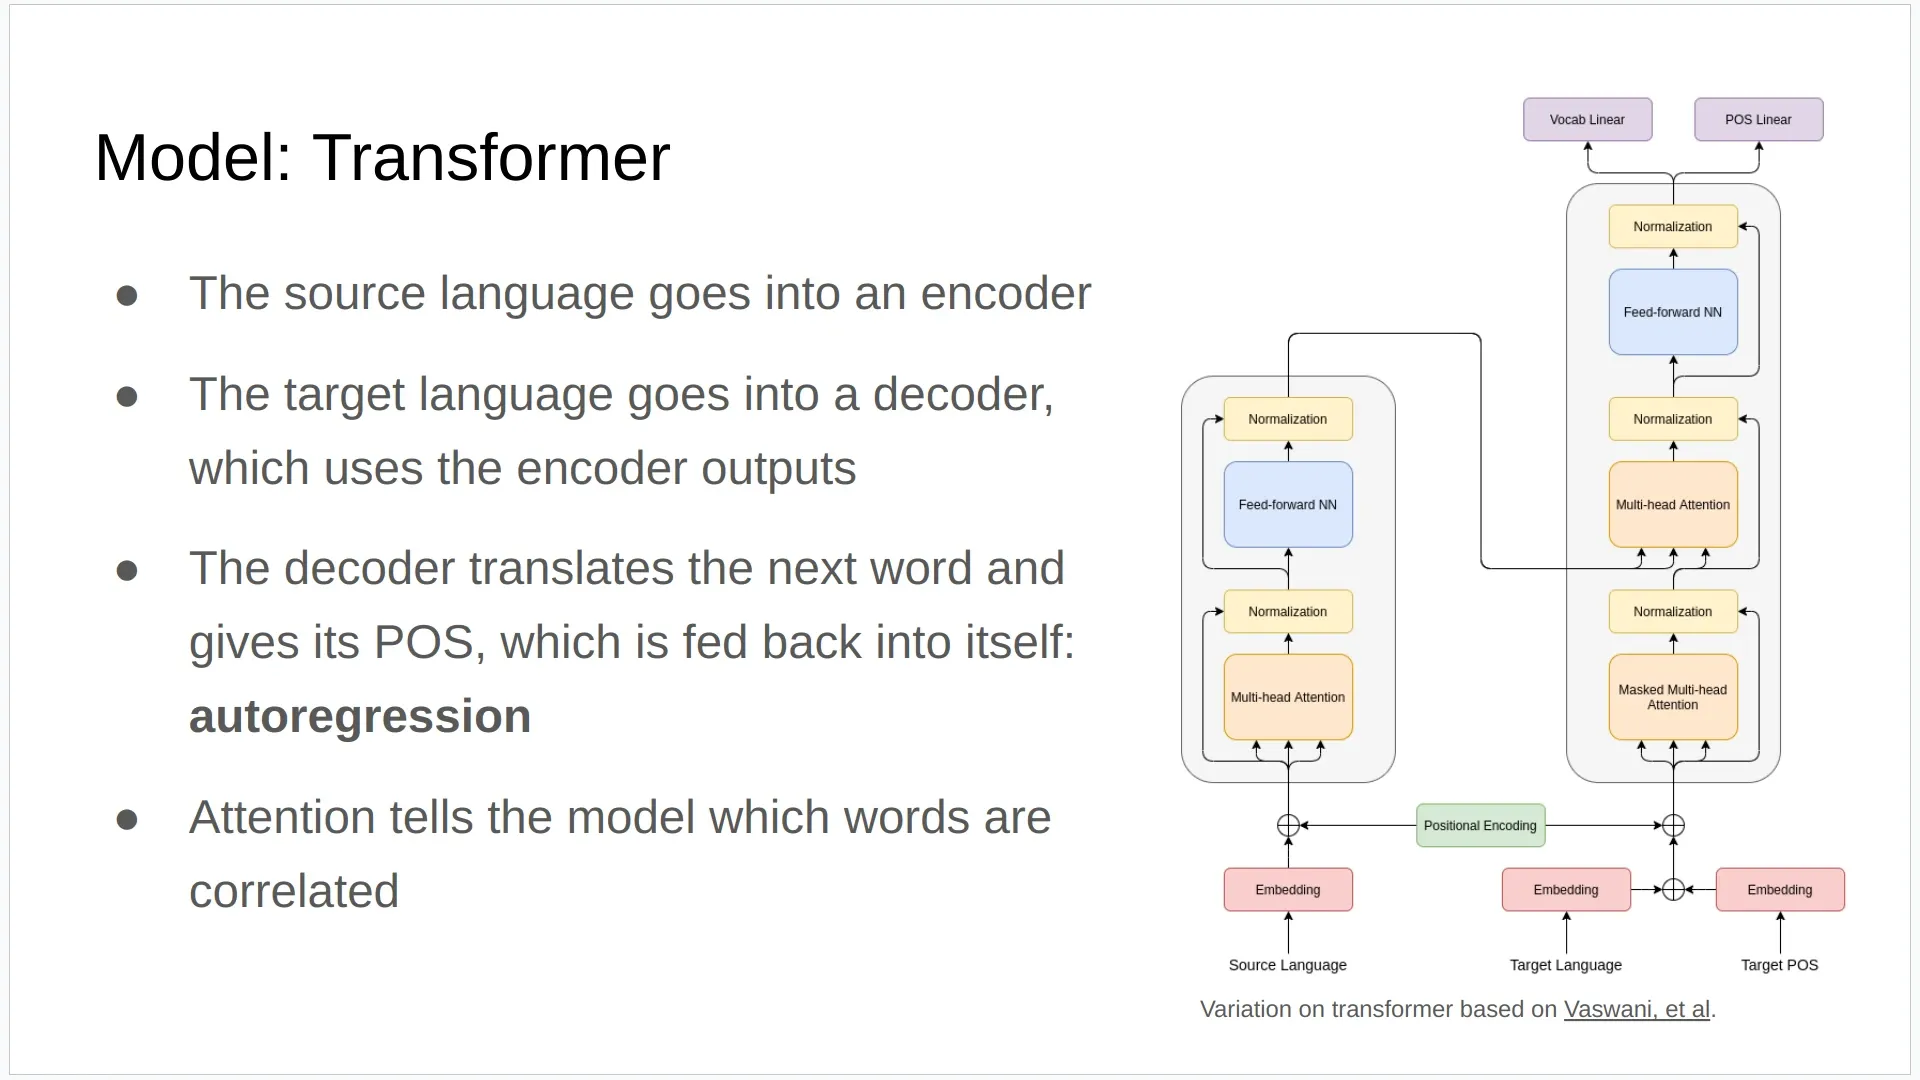 Slide discussing Transformer model and changes